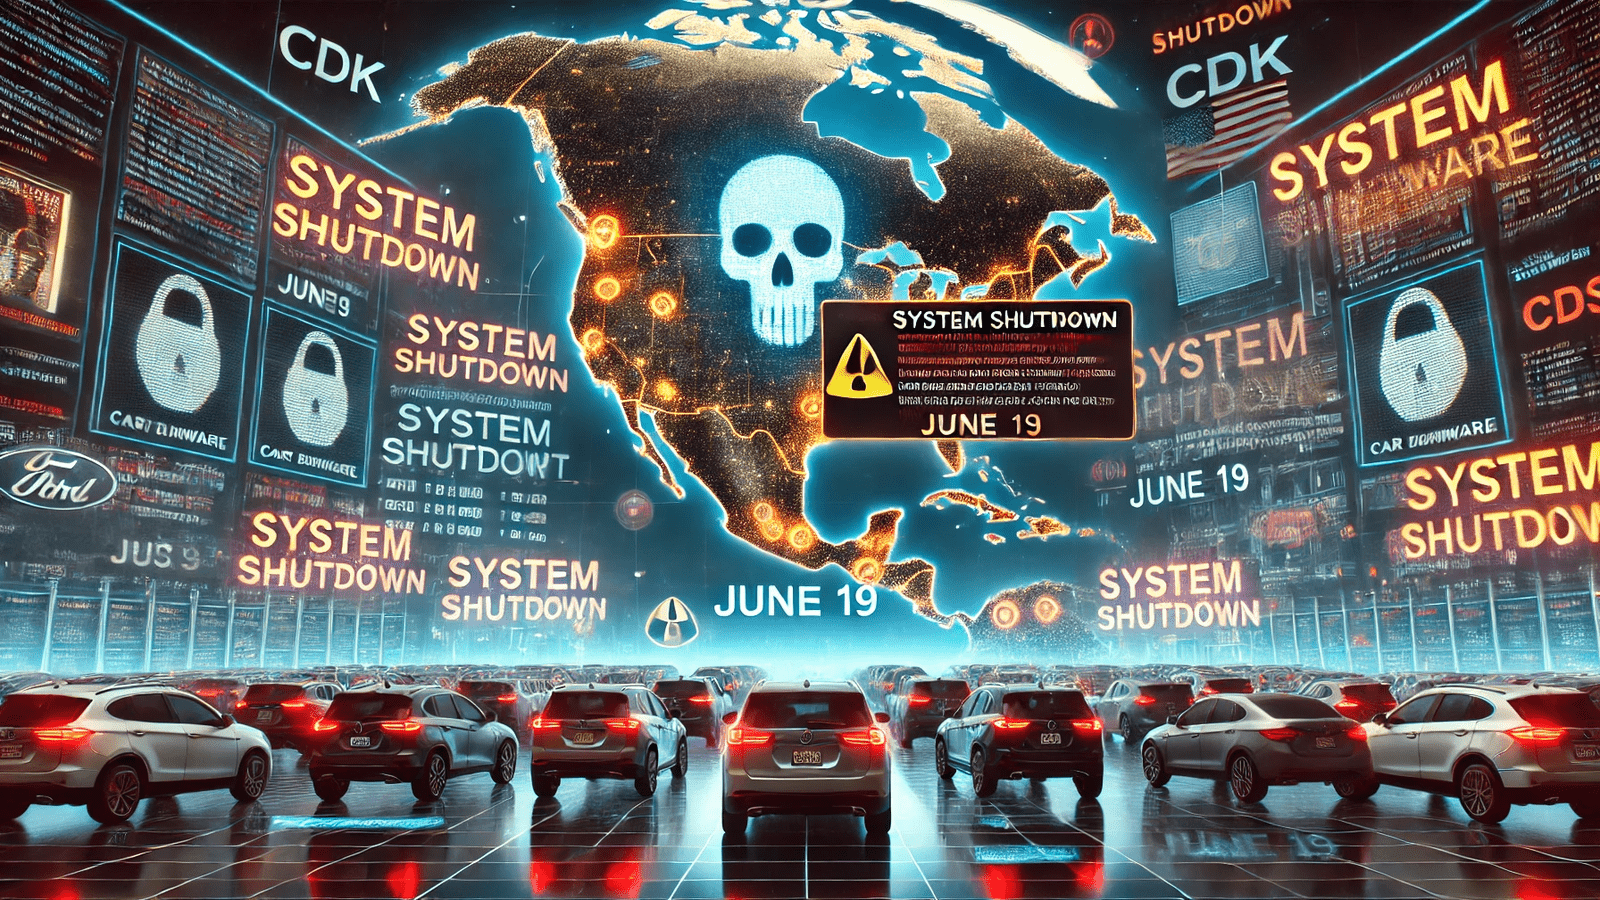 Graphic of CDK ransomware breach impacting the US, displaying system shutdown warnings and affected cars, illustrating the severity and widespread effect of the attack discussed in 'CDK Ransomware Breach: What You Need to Know'.